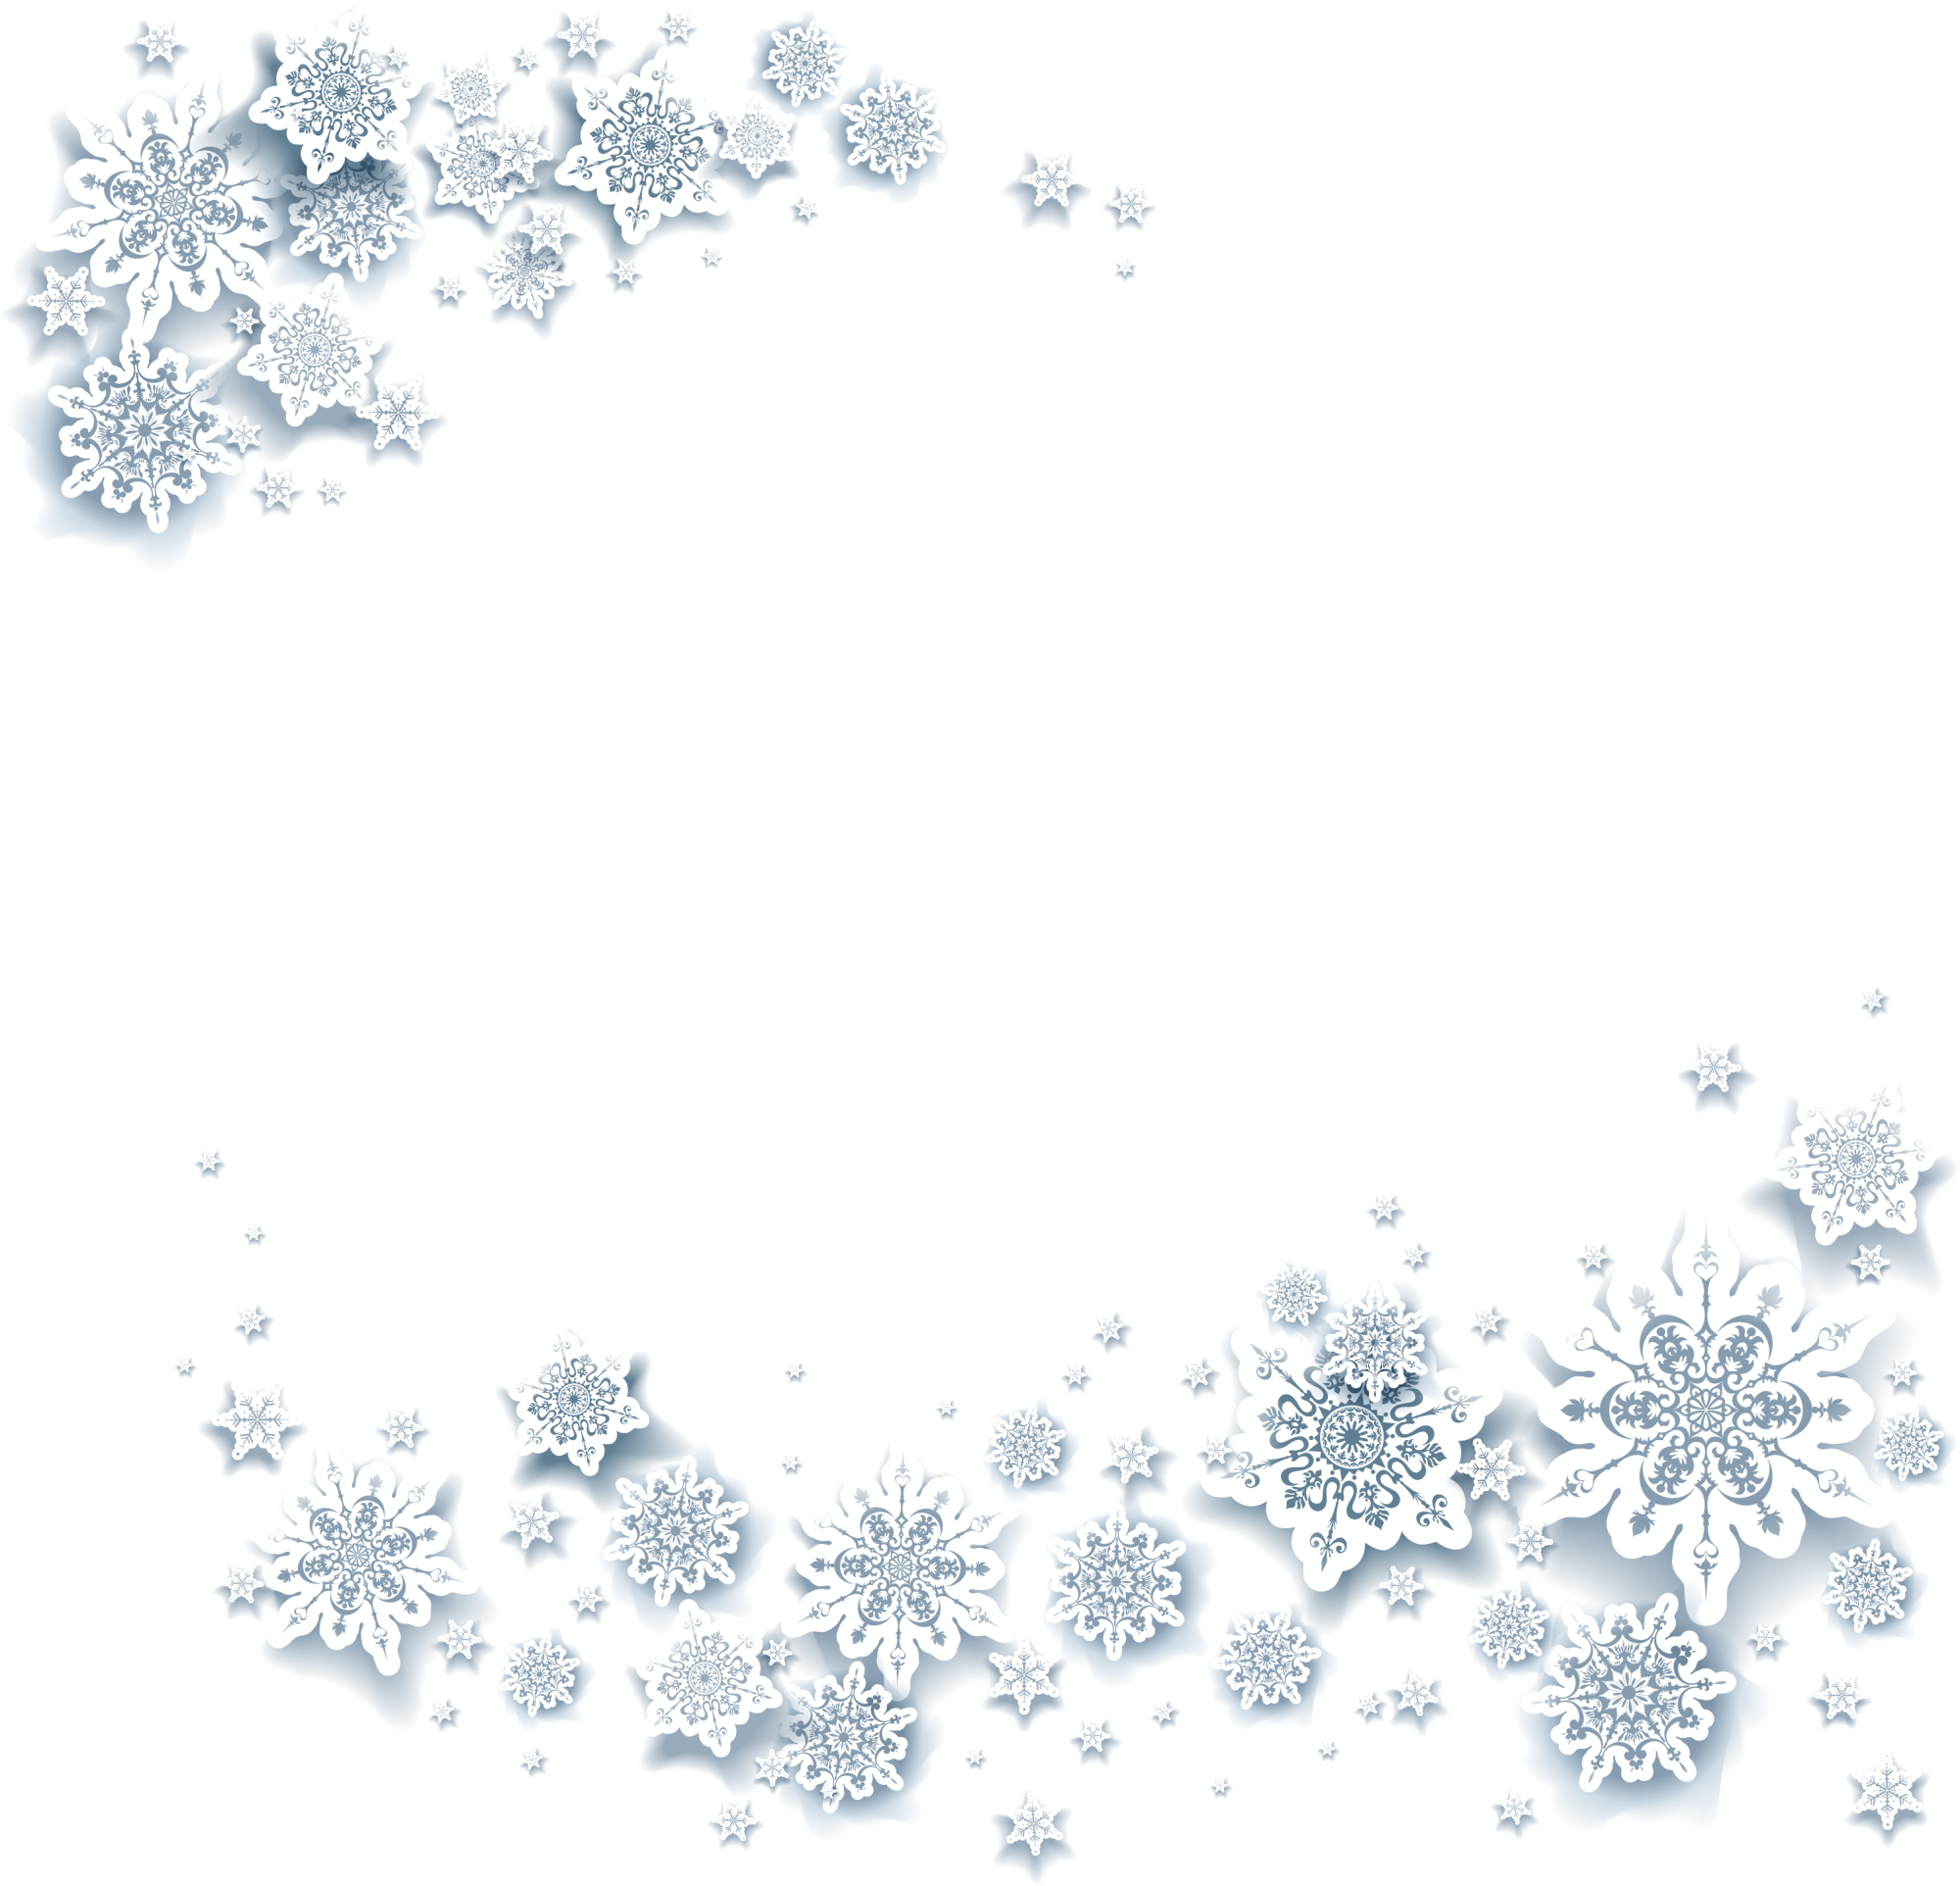 Snowflake Crystal White - White Ice Snow Png Download - 2000*1924 